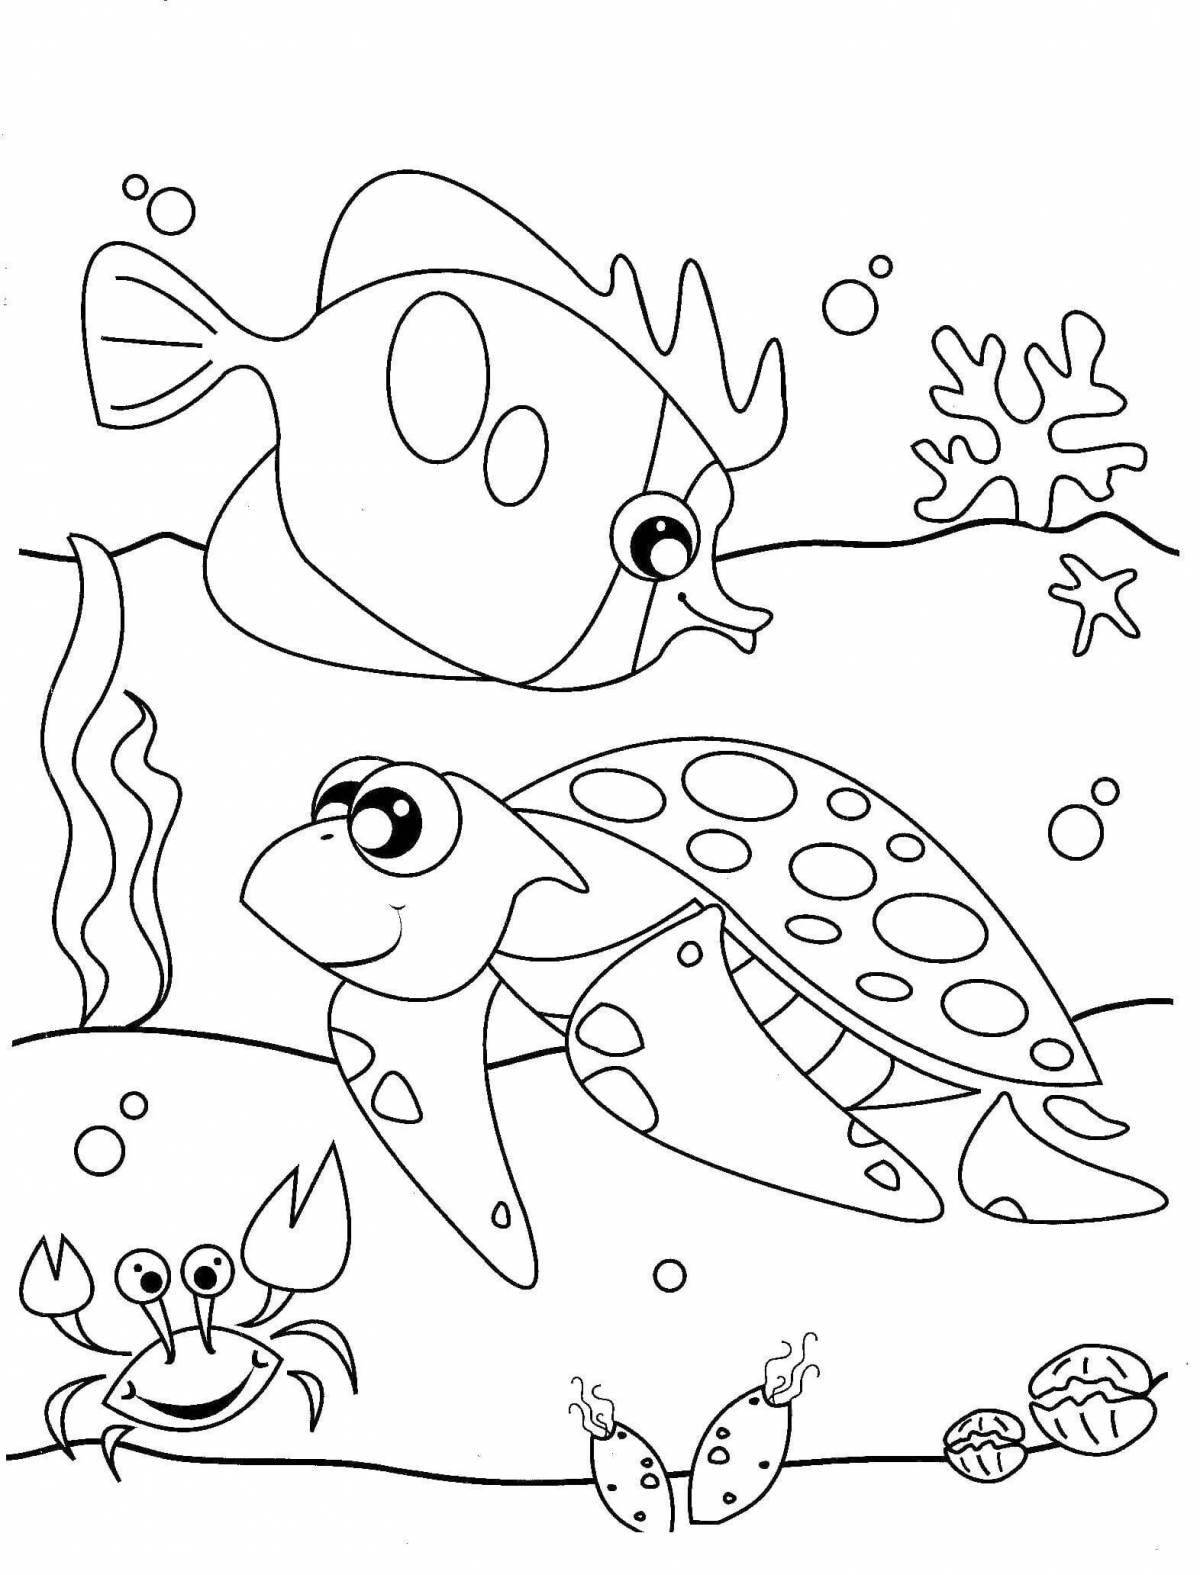 Majestic underwater life coloring pages